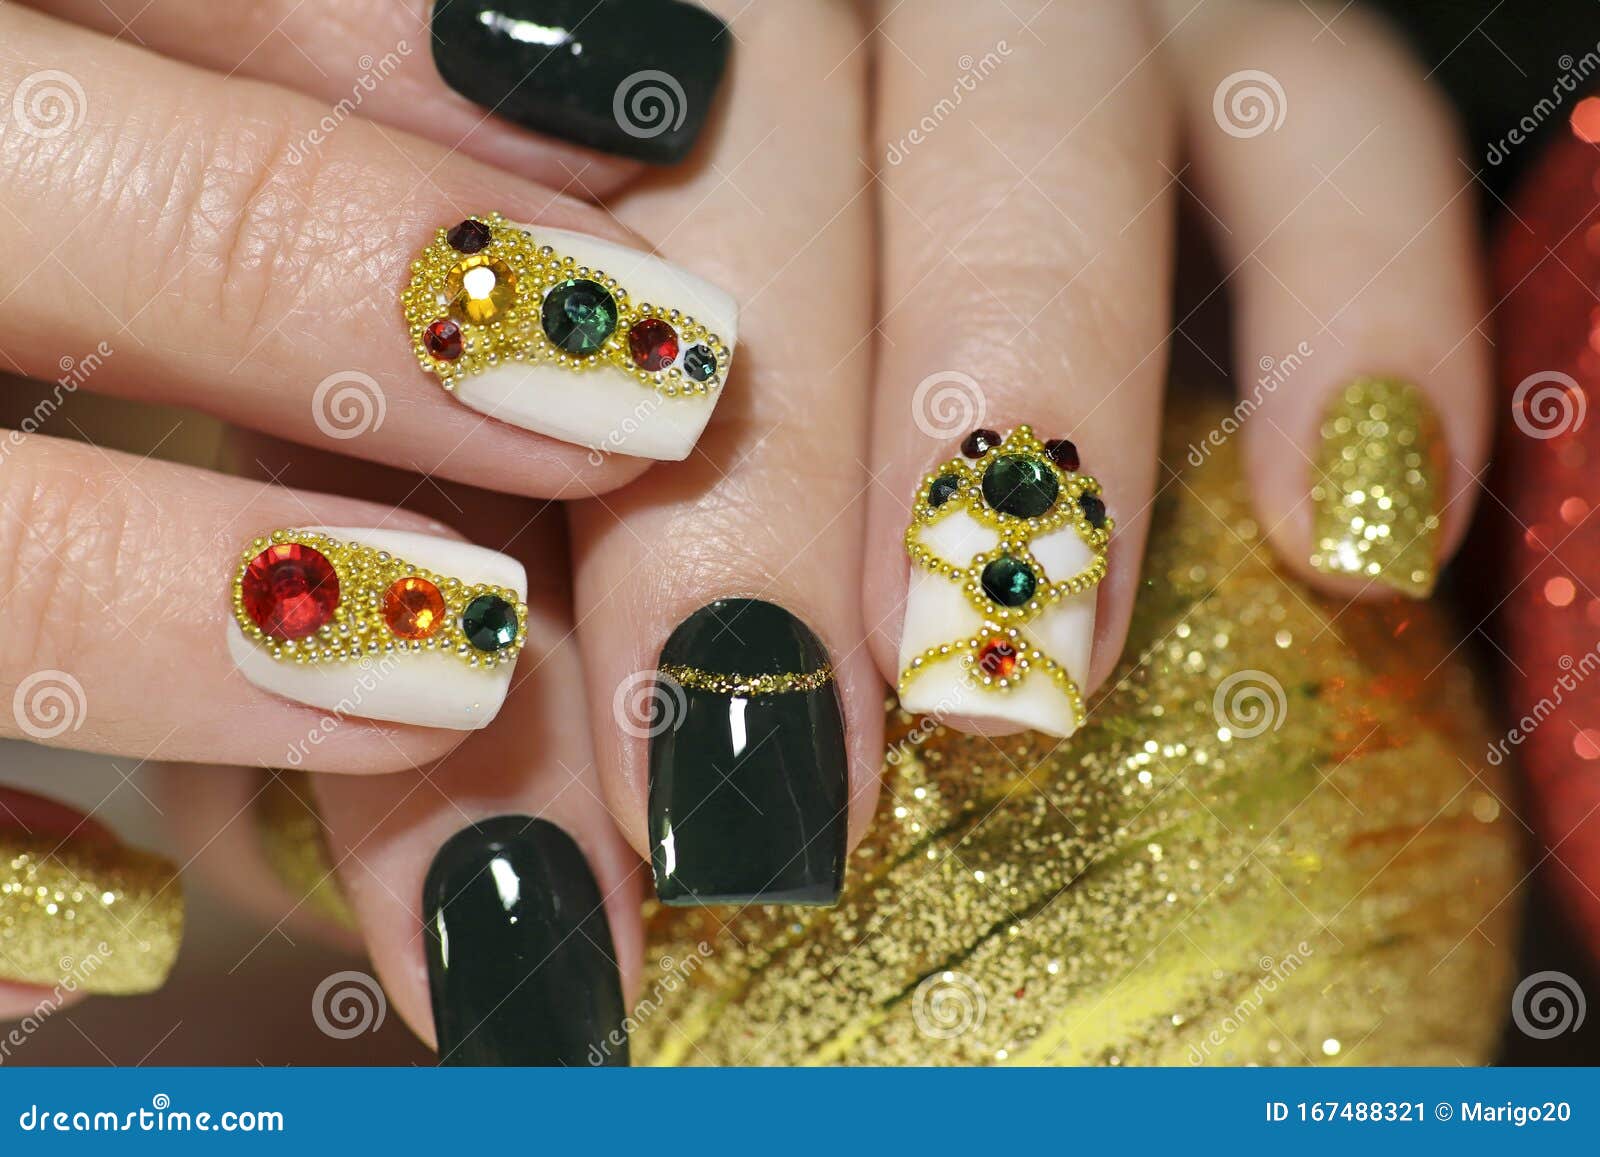 new year`s fashionable beautiful festive manicure on short square nails with green lacquer color.